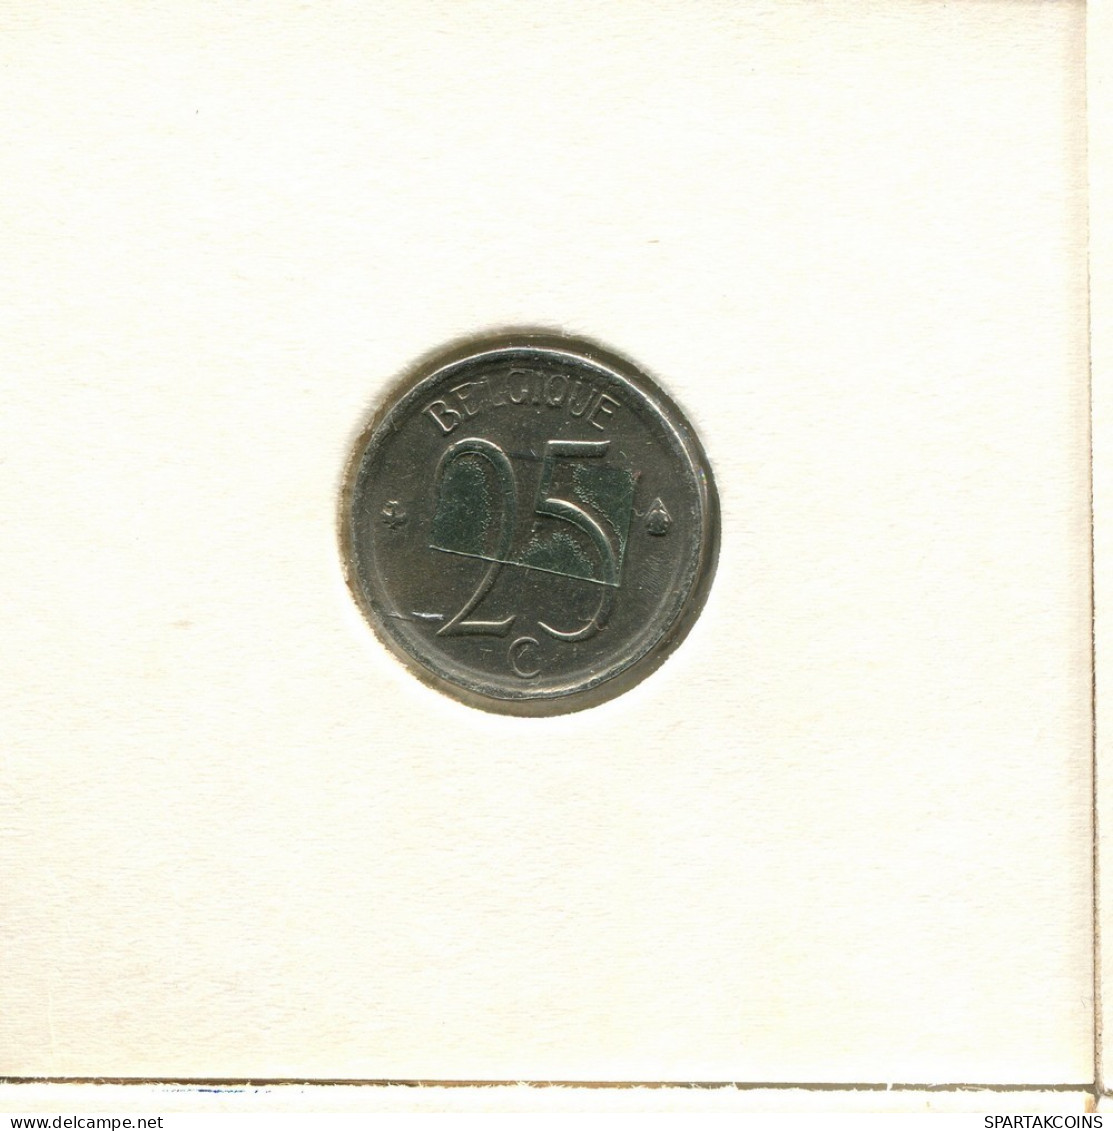 25 CENTIMES 1968 FRENCH Text BELGIUM Coin #BB267.U.A - 25 Cents